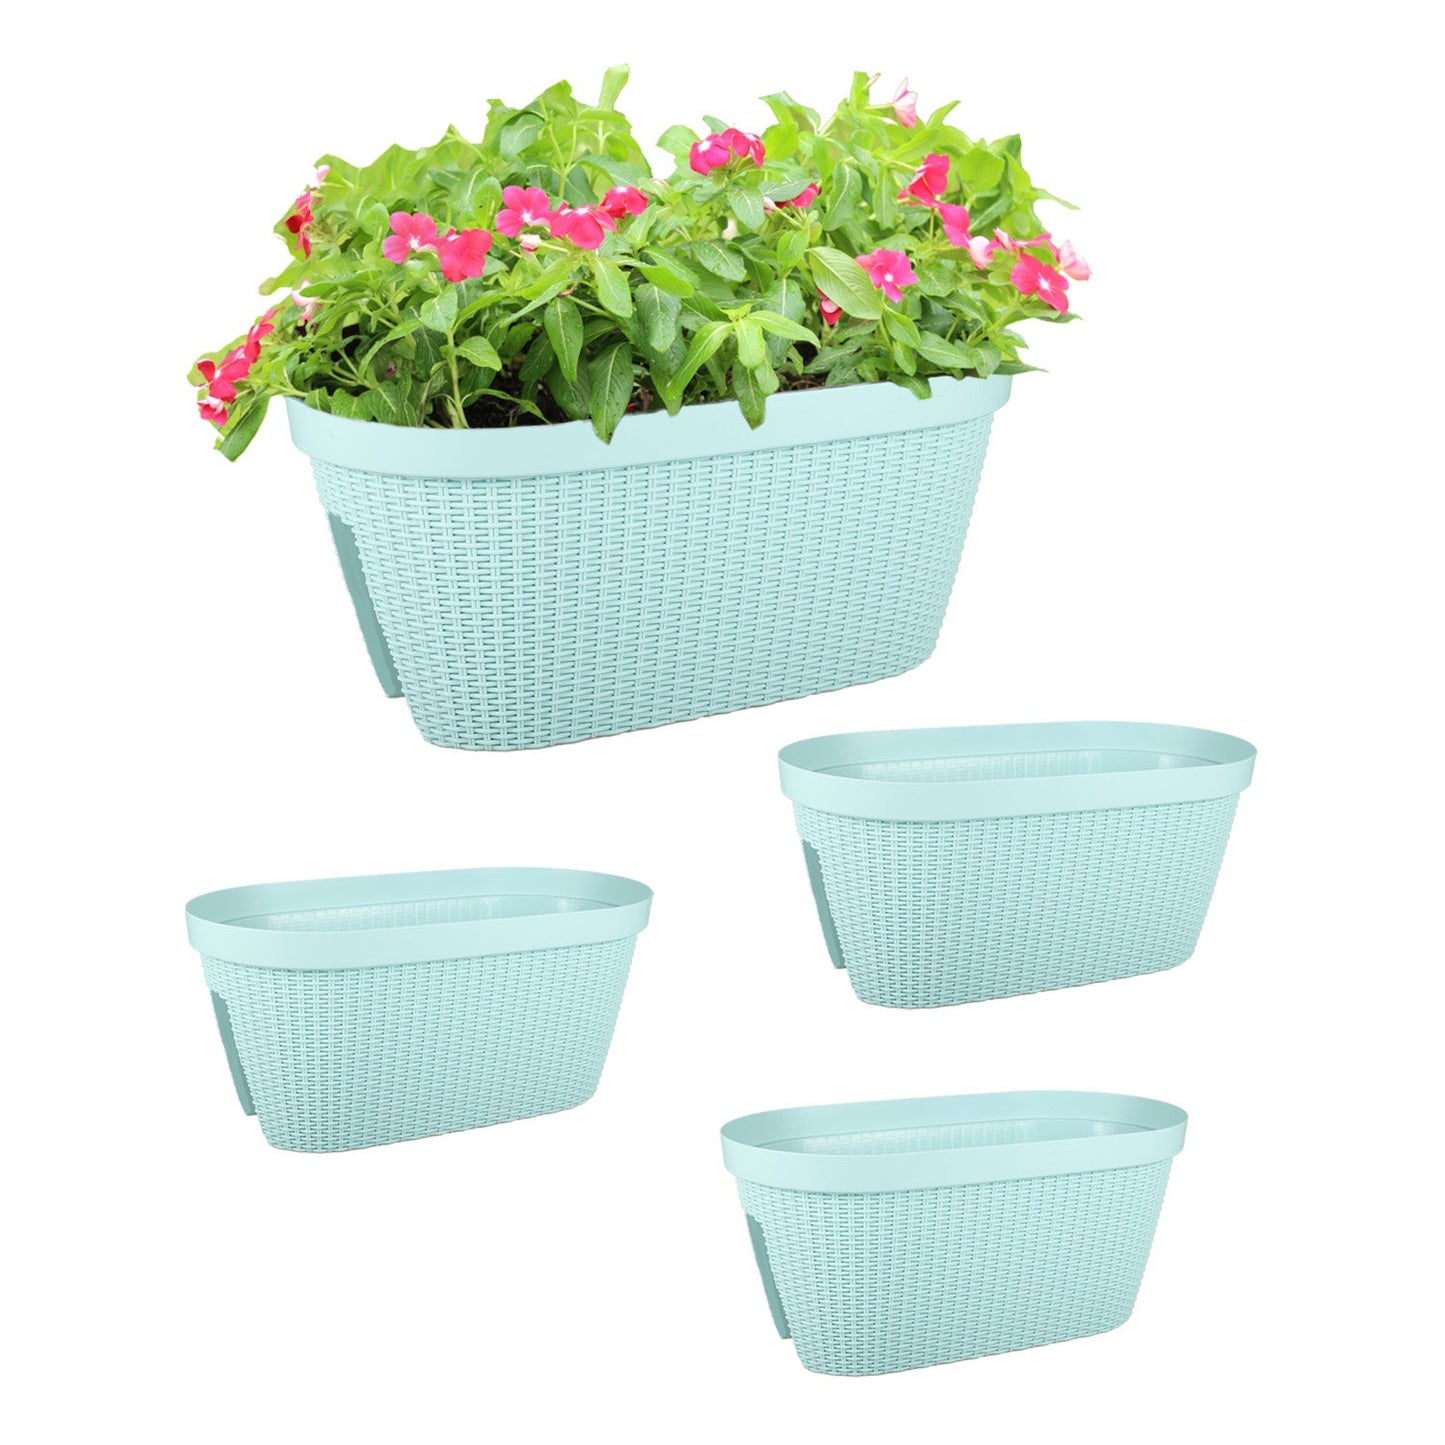 19.6'' Balcony Rattan Pattern Railing Planter Box with Drainage Holes and Adjustable Brackets-Set of 4  Aoodor  Light Blue  